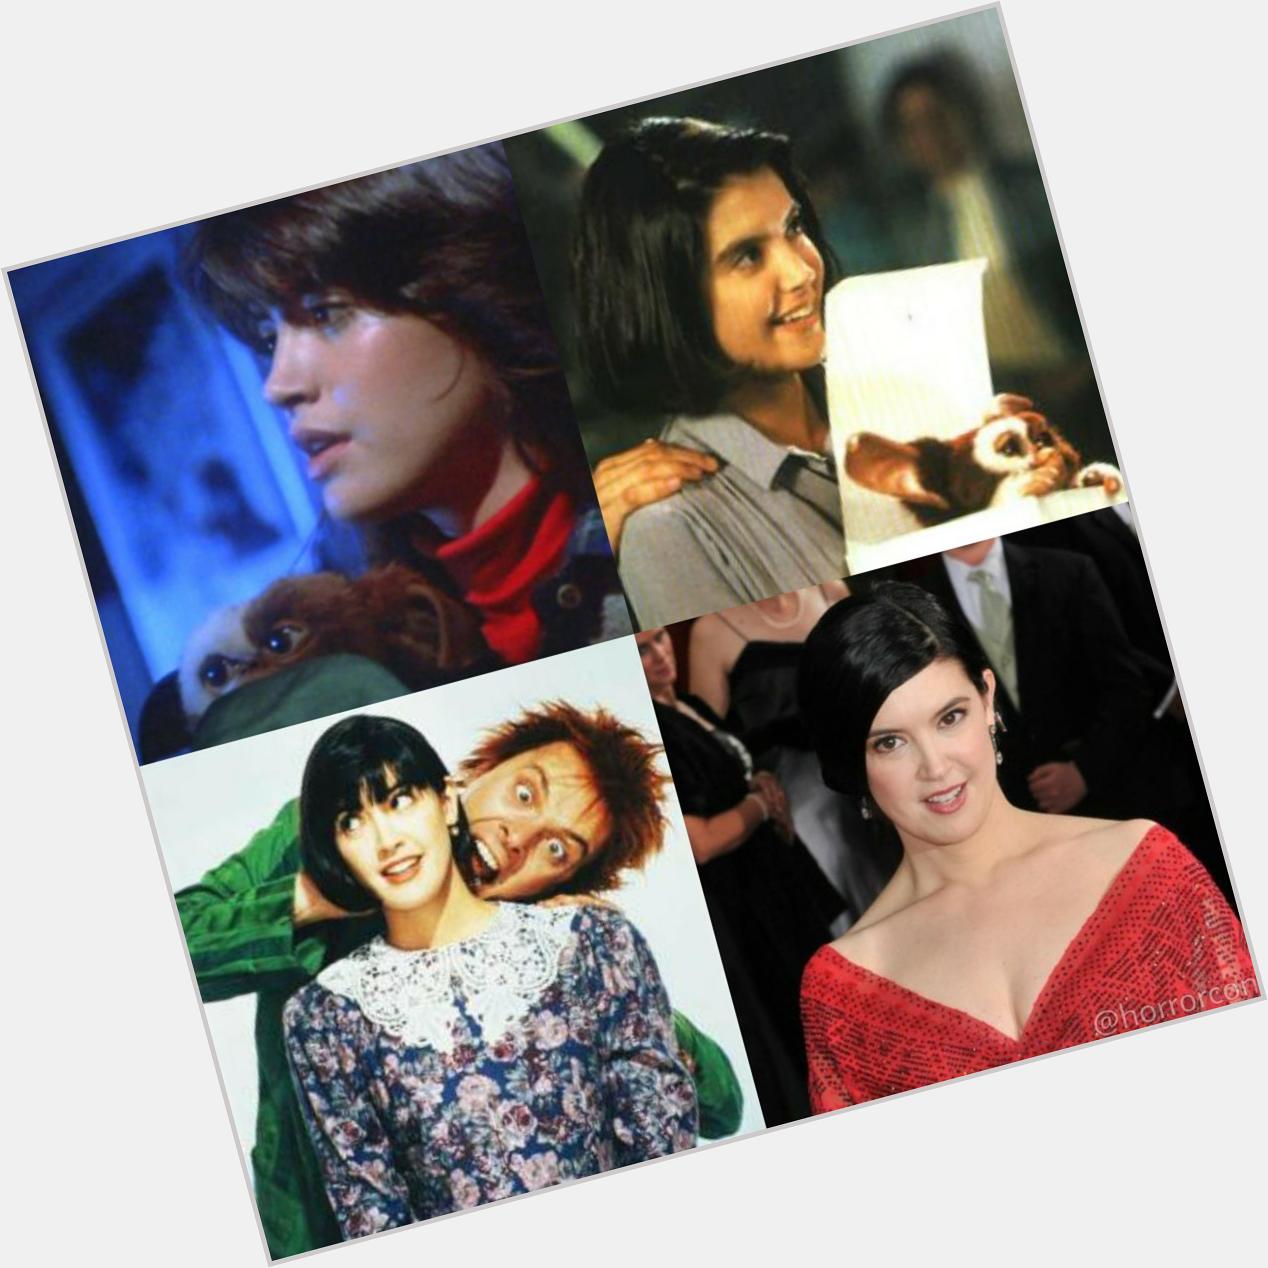 Happy Birthday to Phoebe Cates! Star of  1 & 2 and Drop Dead Fred, celebrates her 52nd today. 